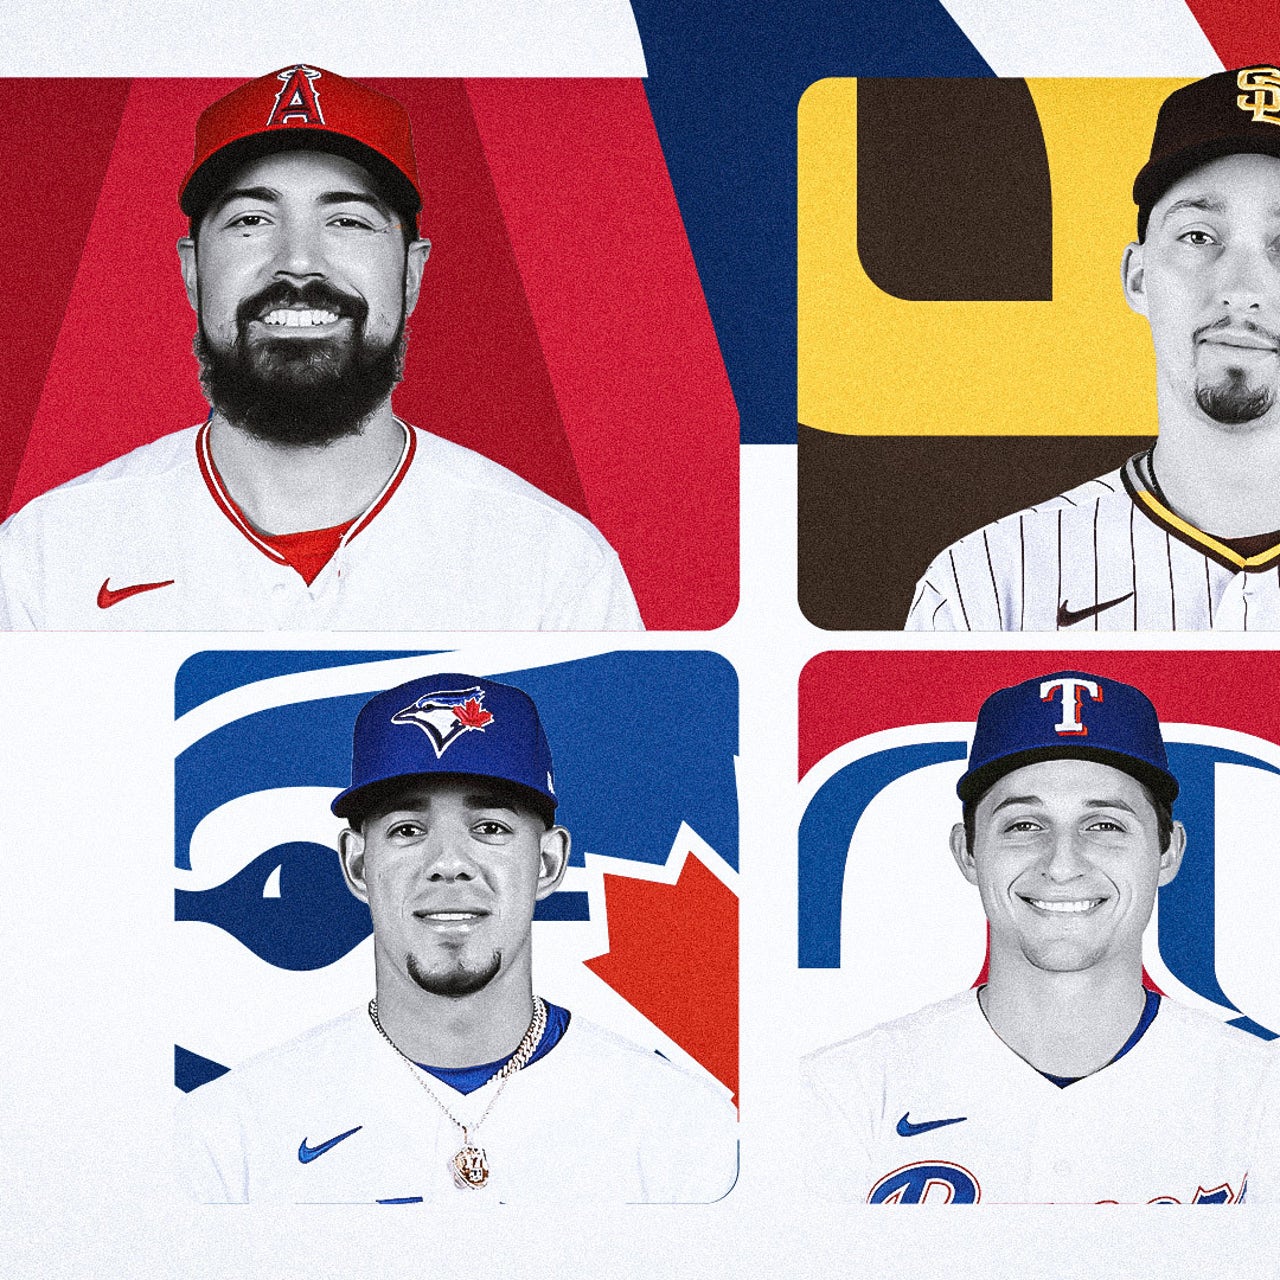 2017 MLB special event uniforms unveiled, by Rowan Kavner